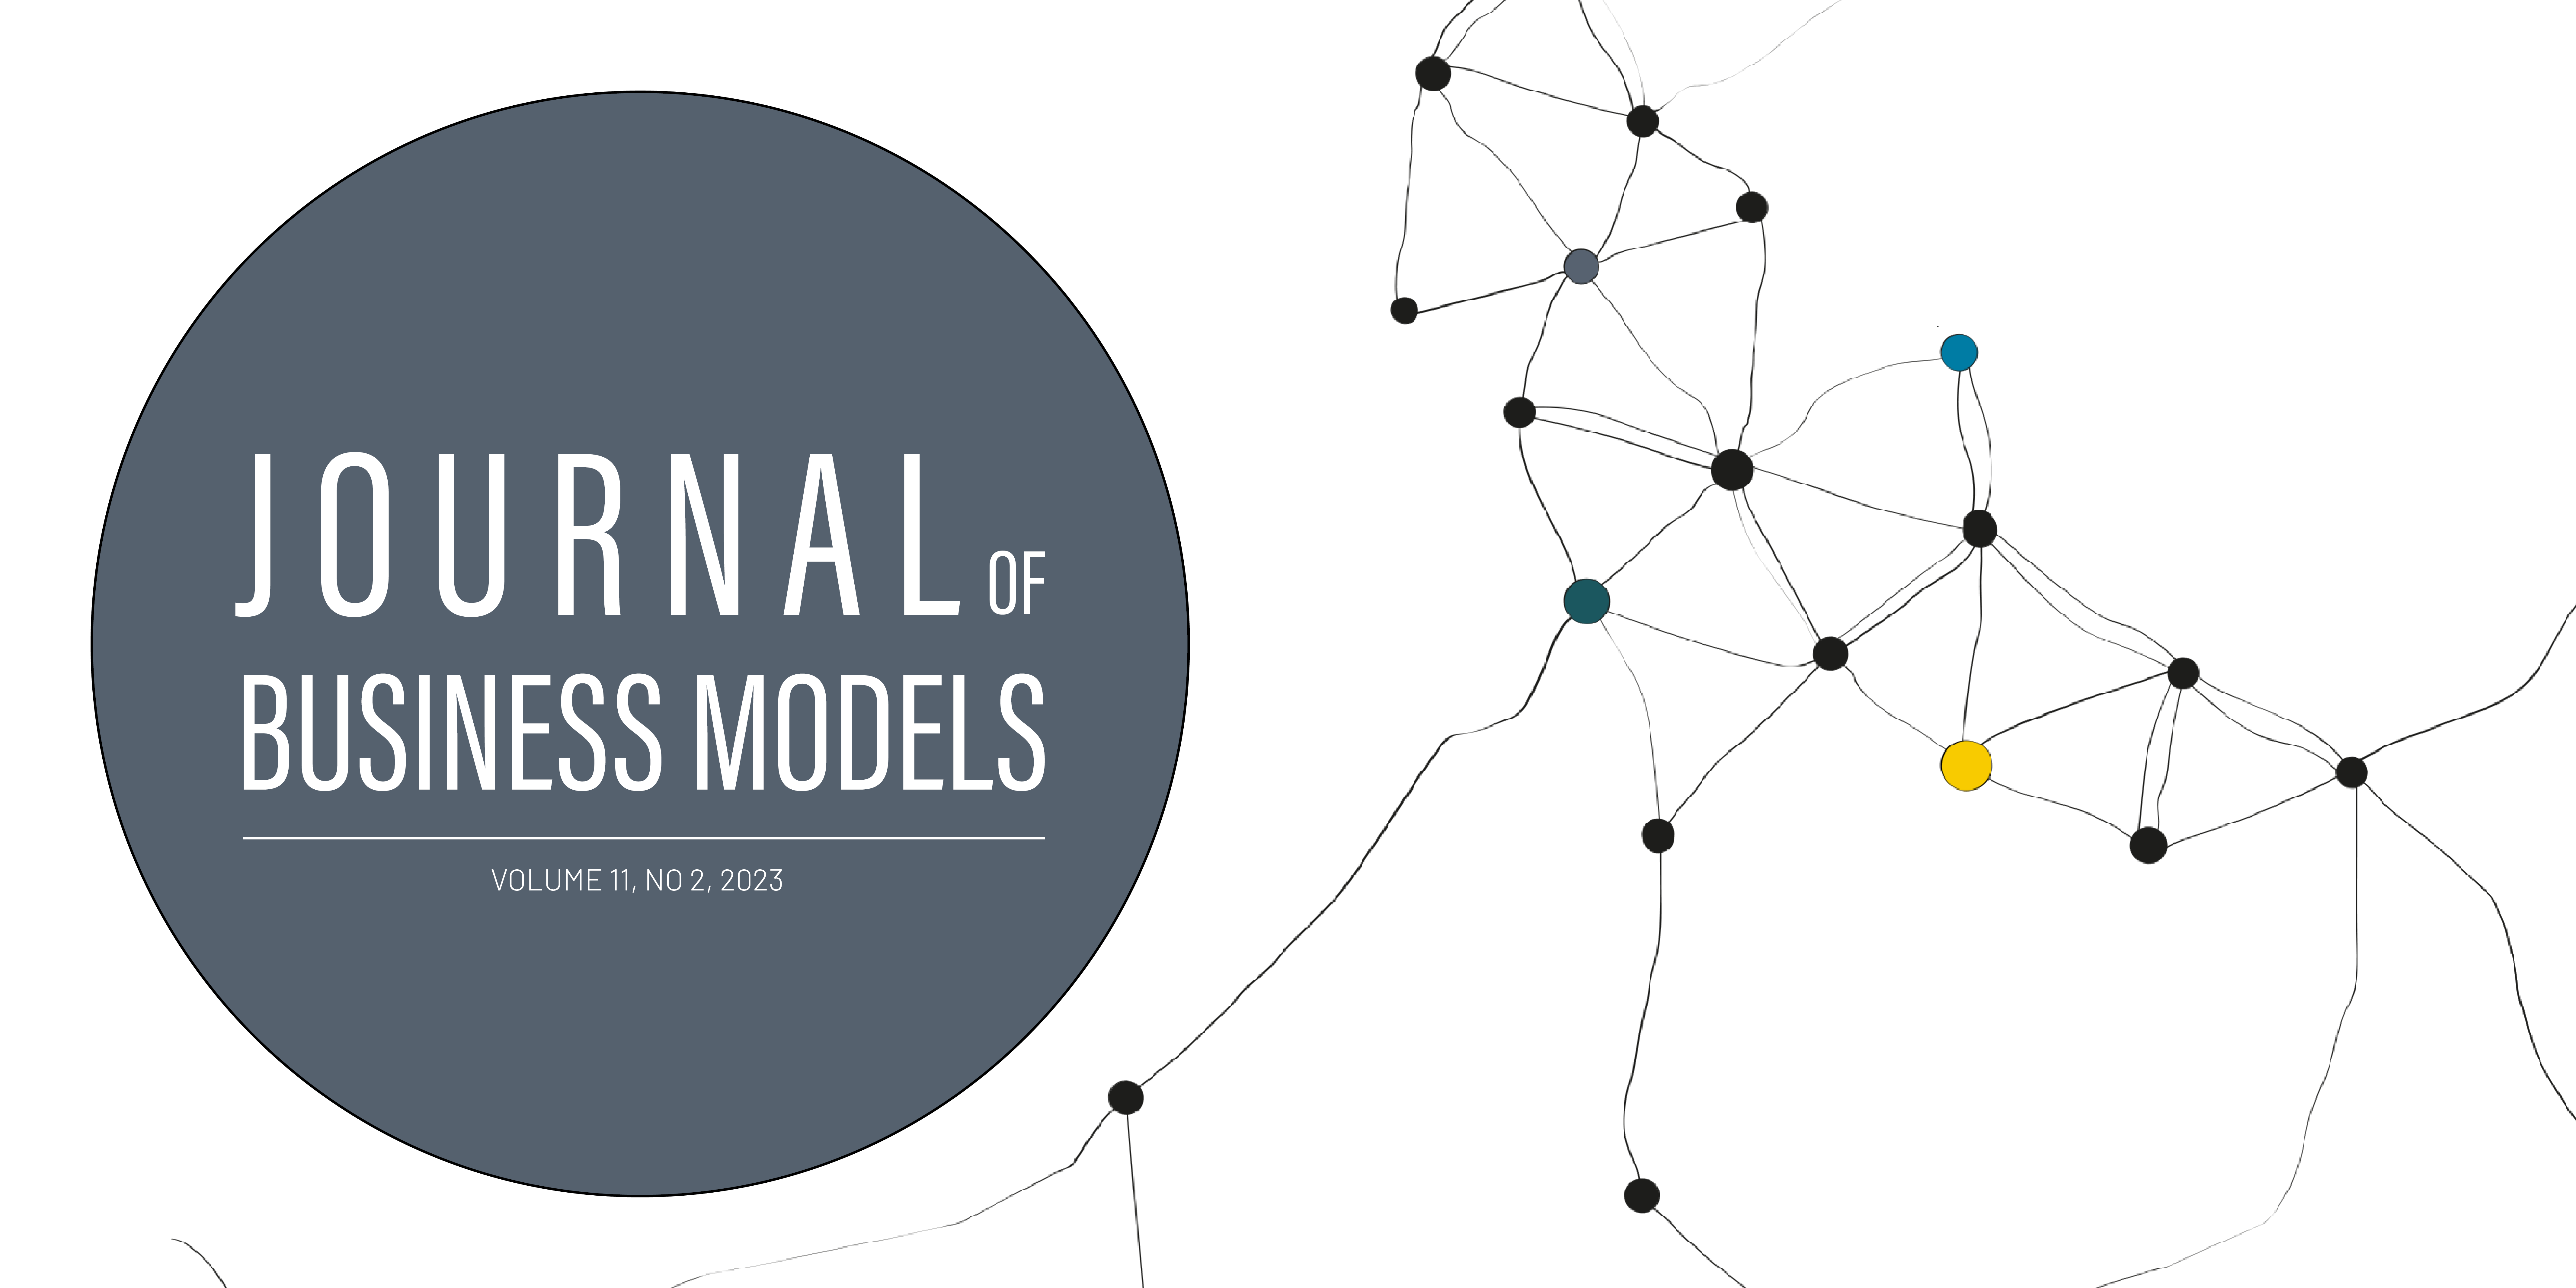 					View Vol. 11 No. 2 (2023): Journal of Business Models
				